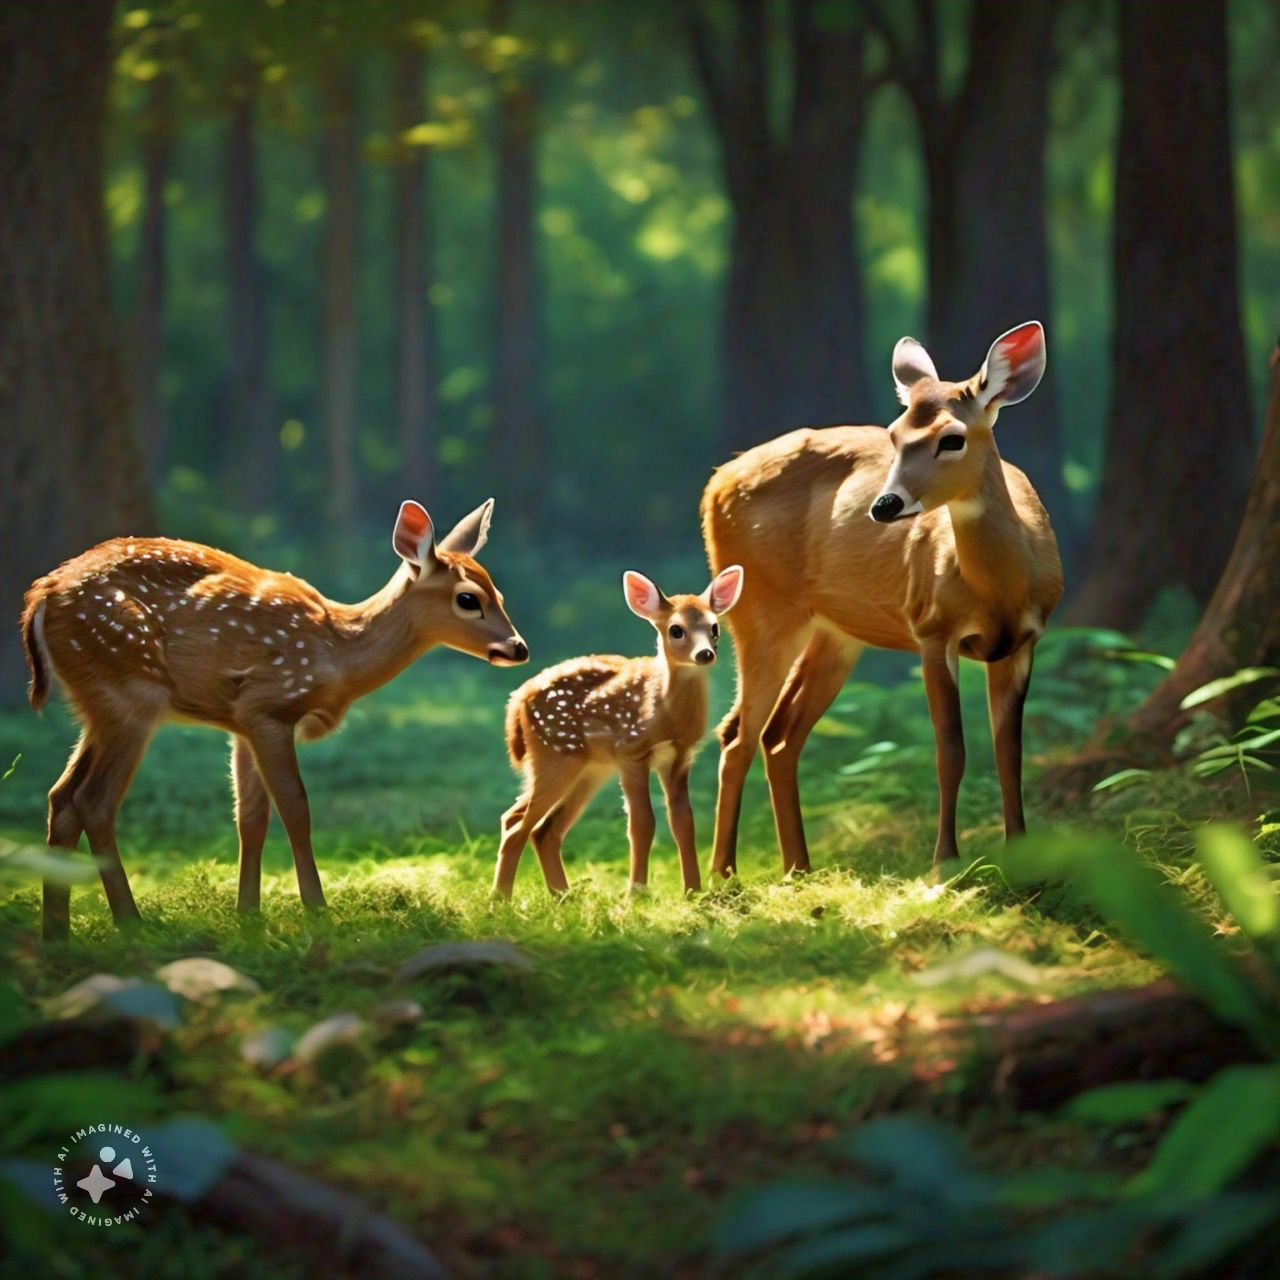 Mulish Miko a Baby Deer Living With Her Parents in a Woodland